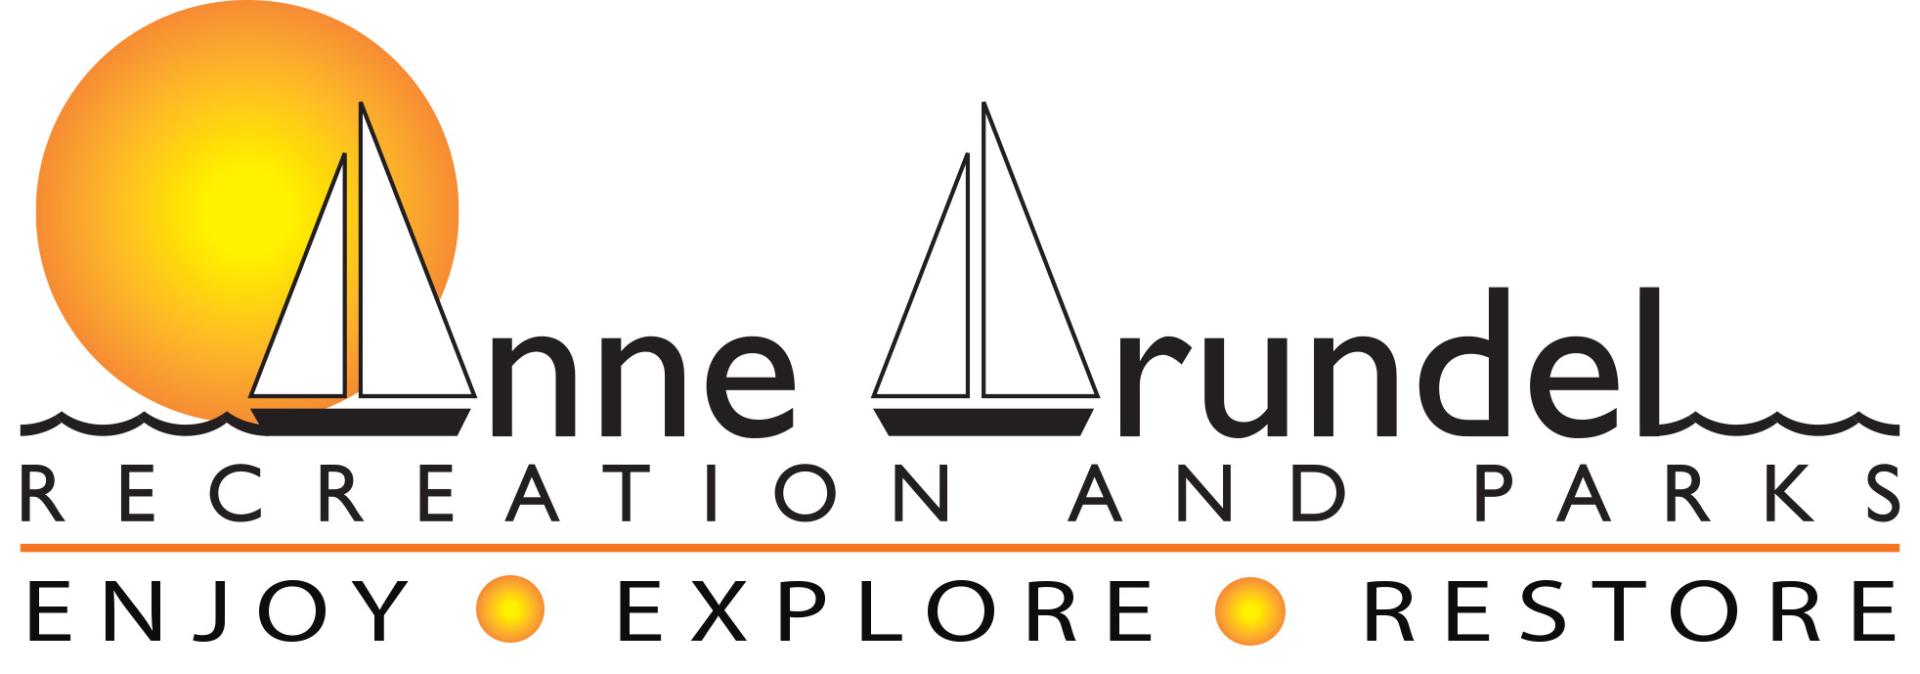 Anne Arundel County Department of Recreation and Parks Logo